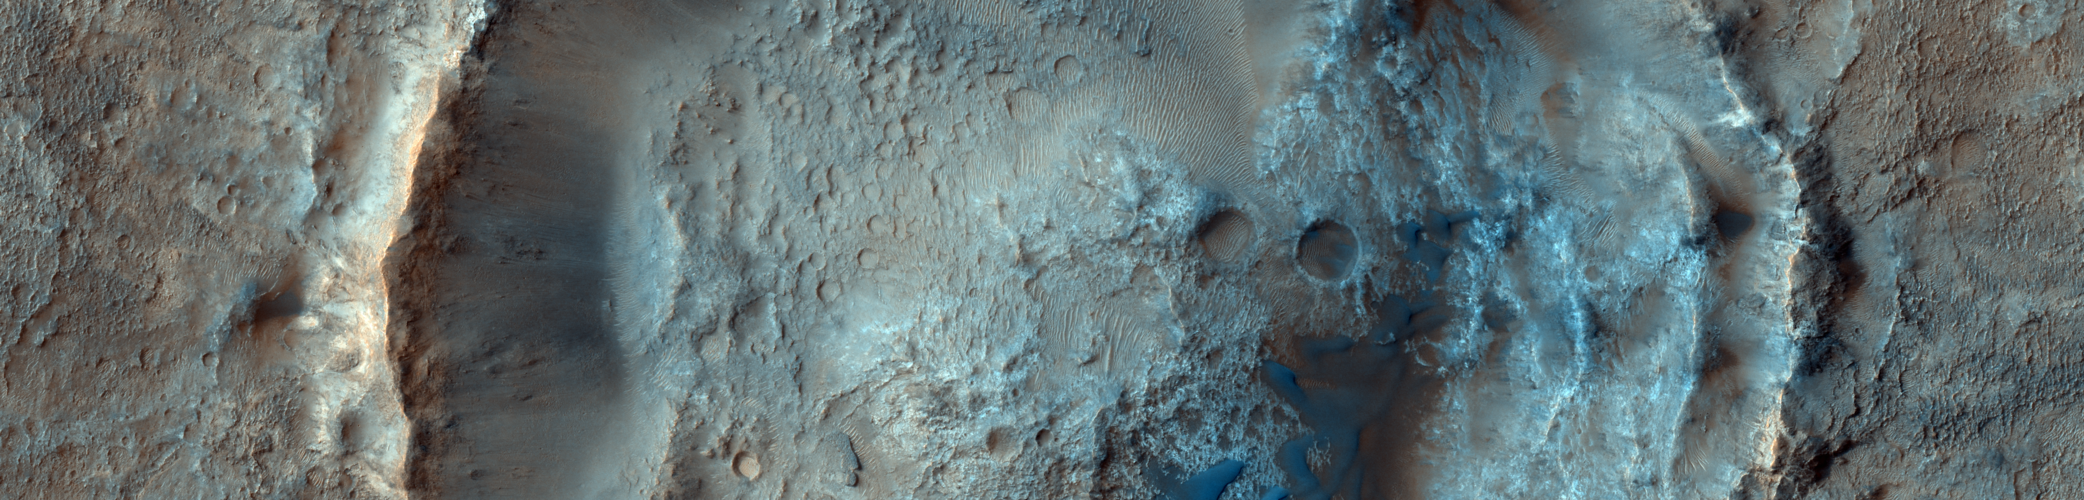 Impact crater on Mars